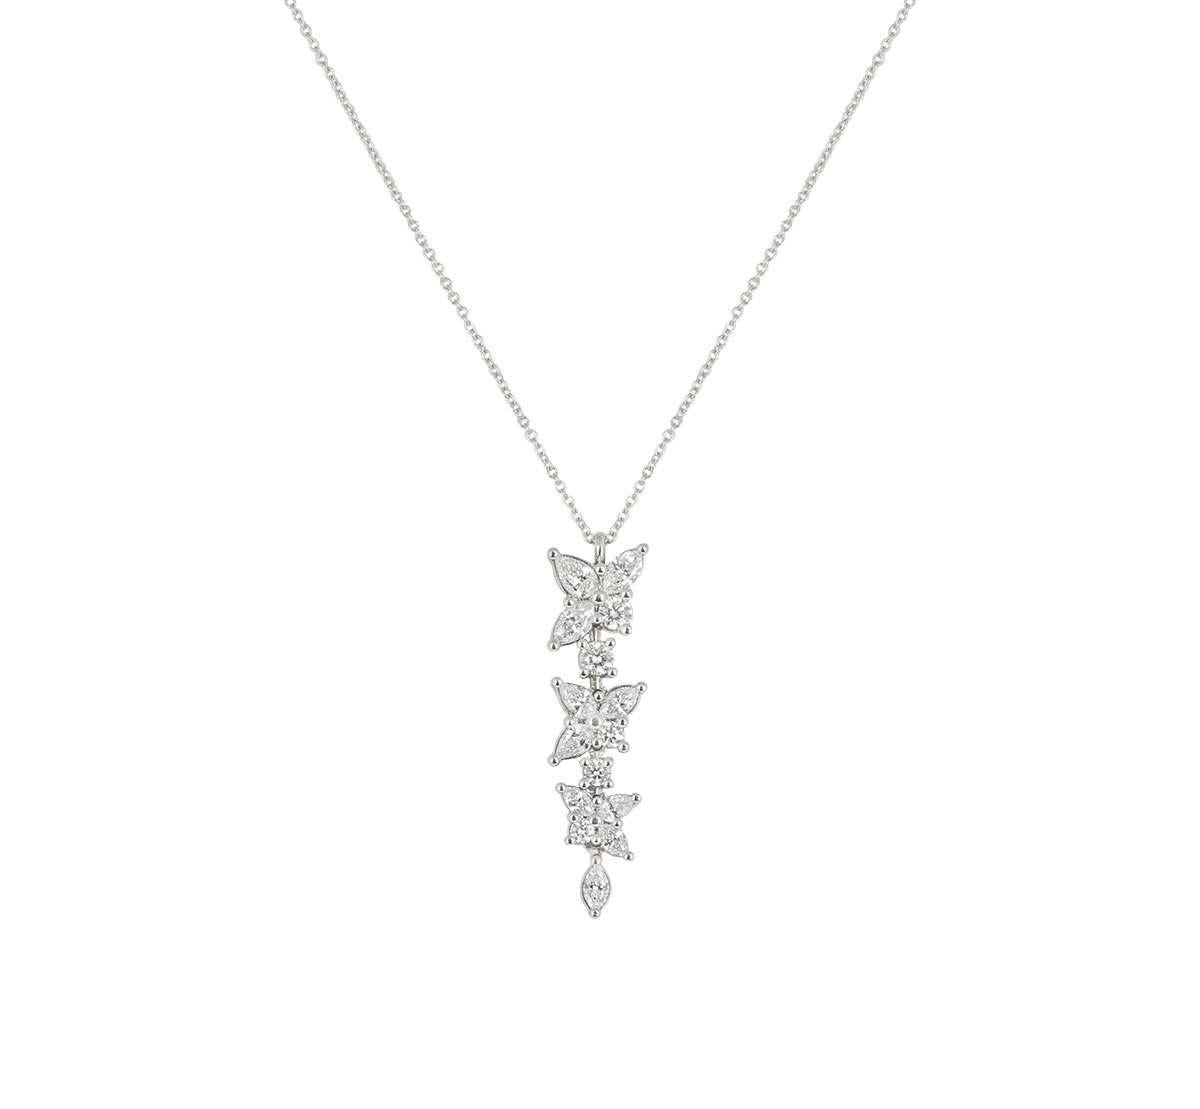 Women's Tiffany & Co. Victoria Mixed Cluster drop necklace with diamonds